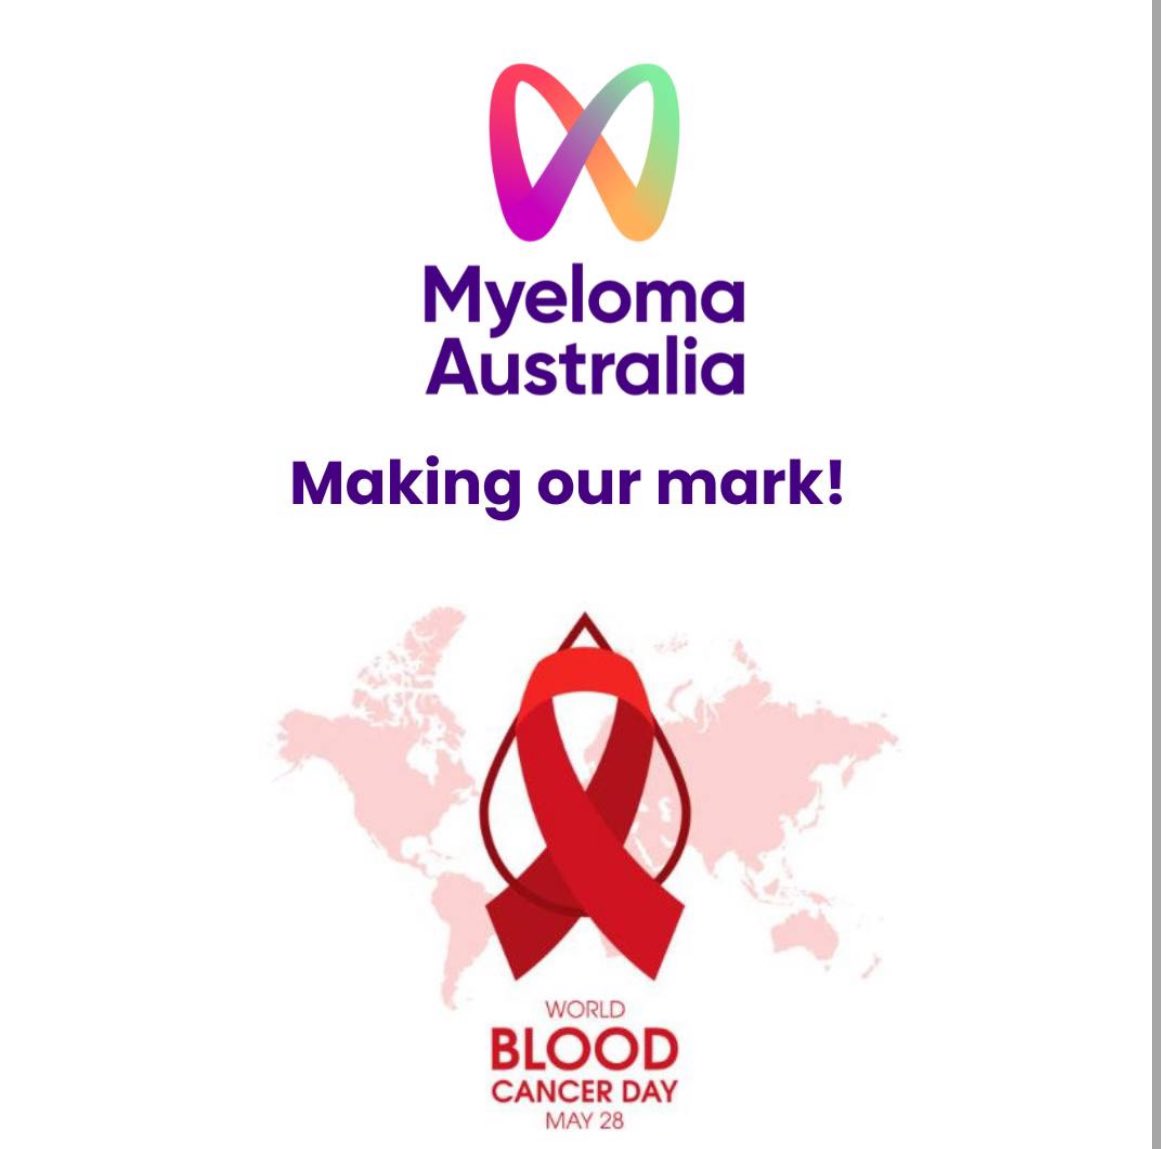 Tomorrow is World Blood Cancer day. Time to raise the awareness of blood cancers. This covers conditions including Myelomas,  Lymphomas and Leukaemia. Please consider donating blood for those that need it. #bloodcancer  #myeloma #lymphoma #leukaemia #fuckcancer